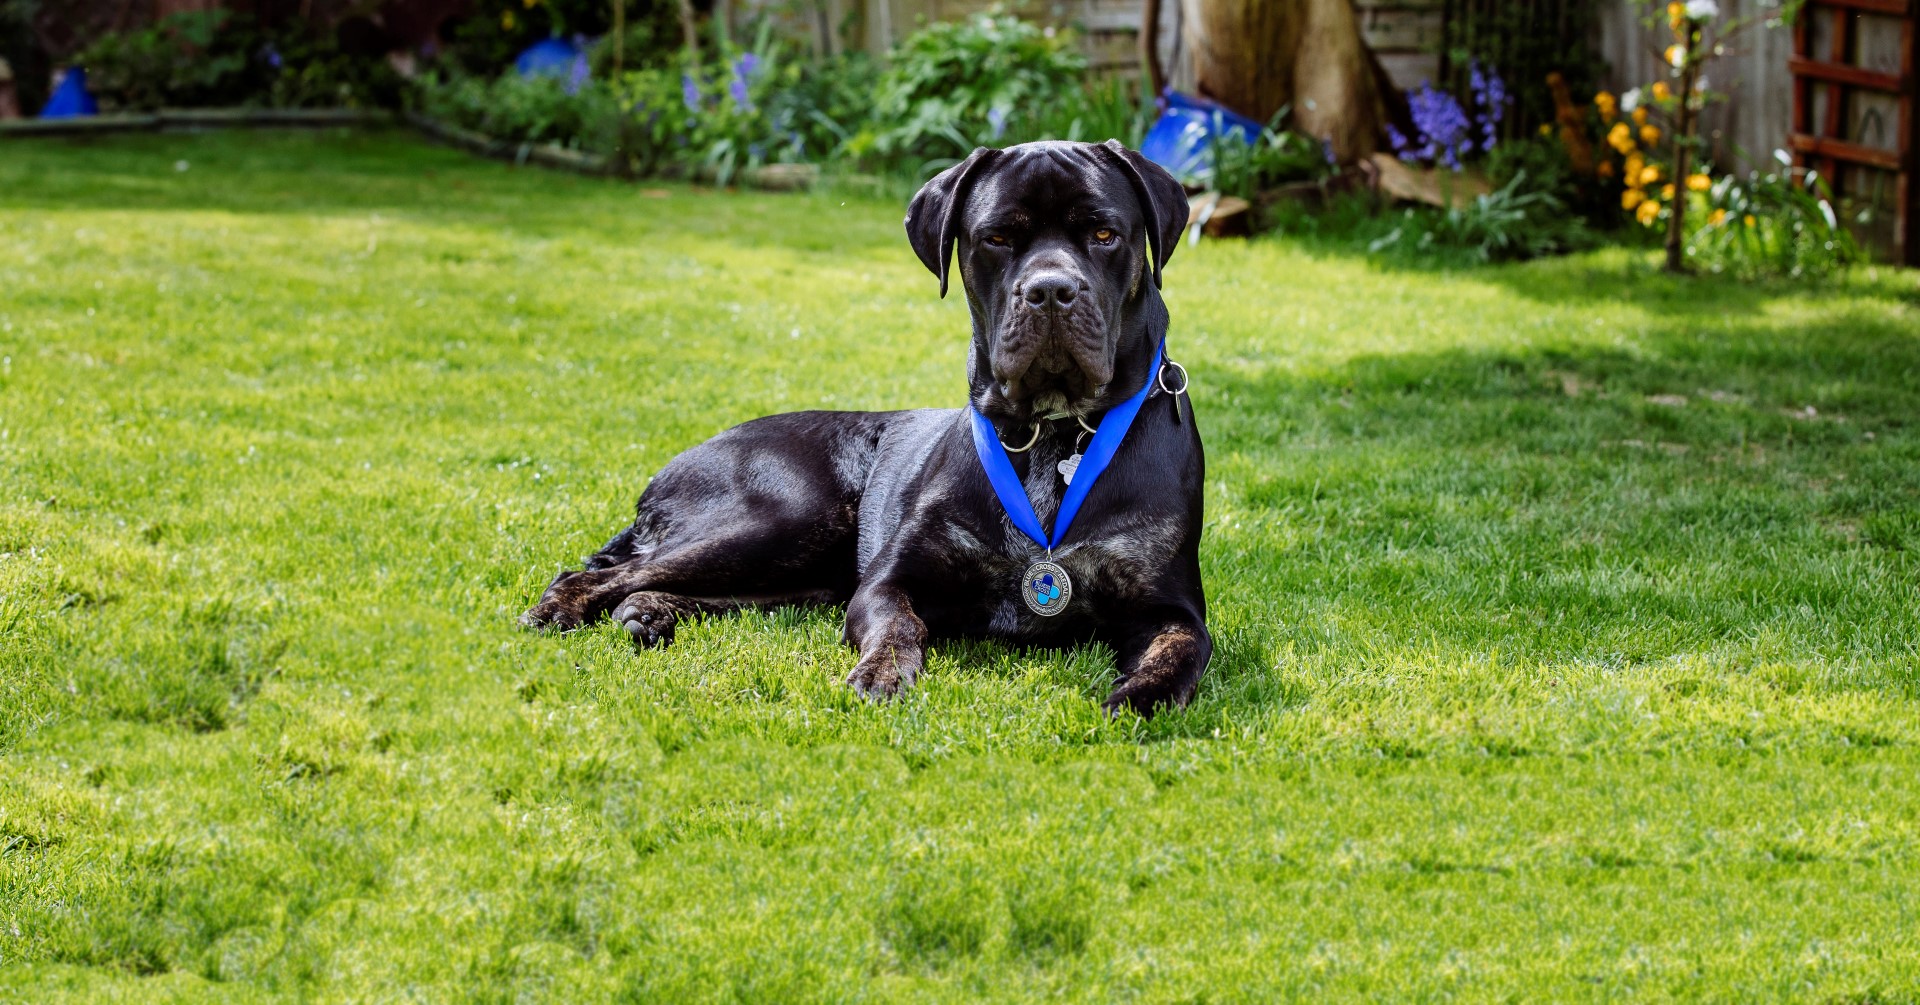 Lemmy sitting in the garden wearing his medal.